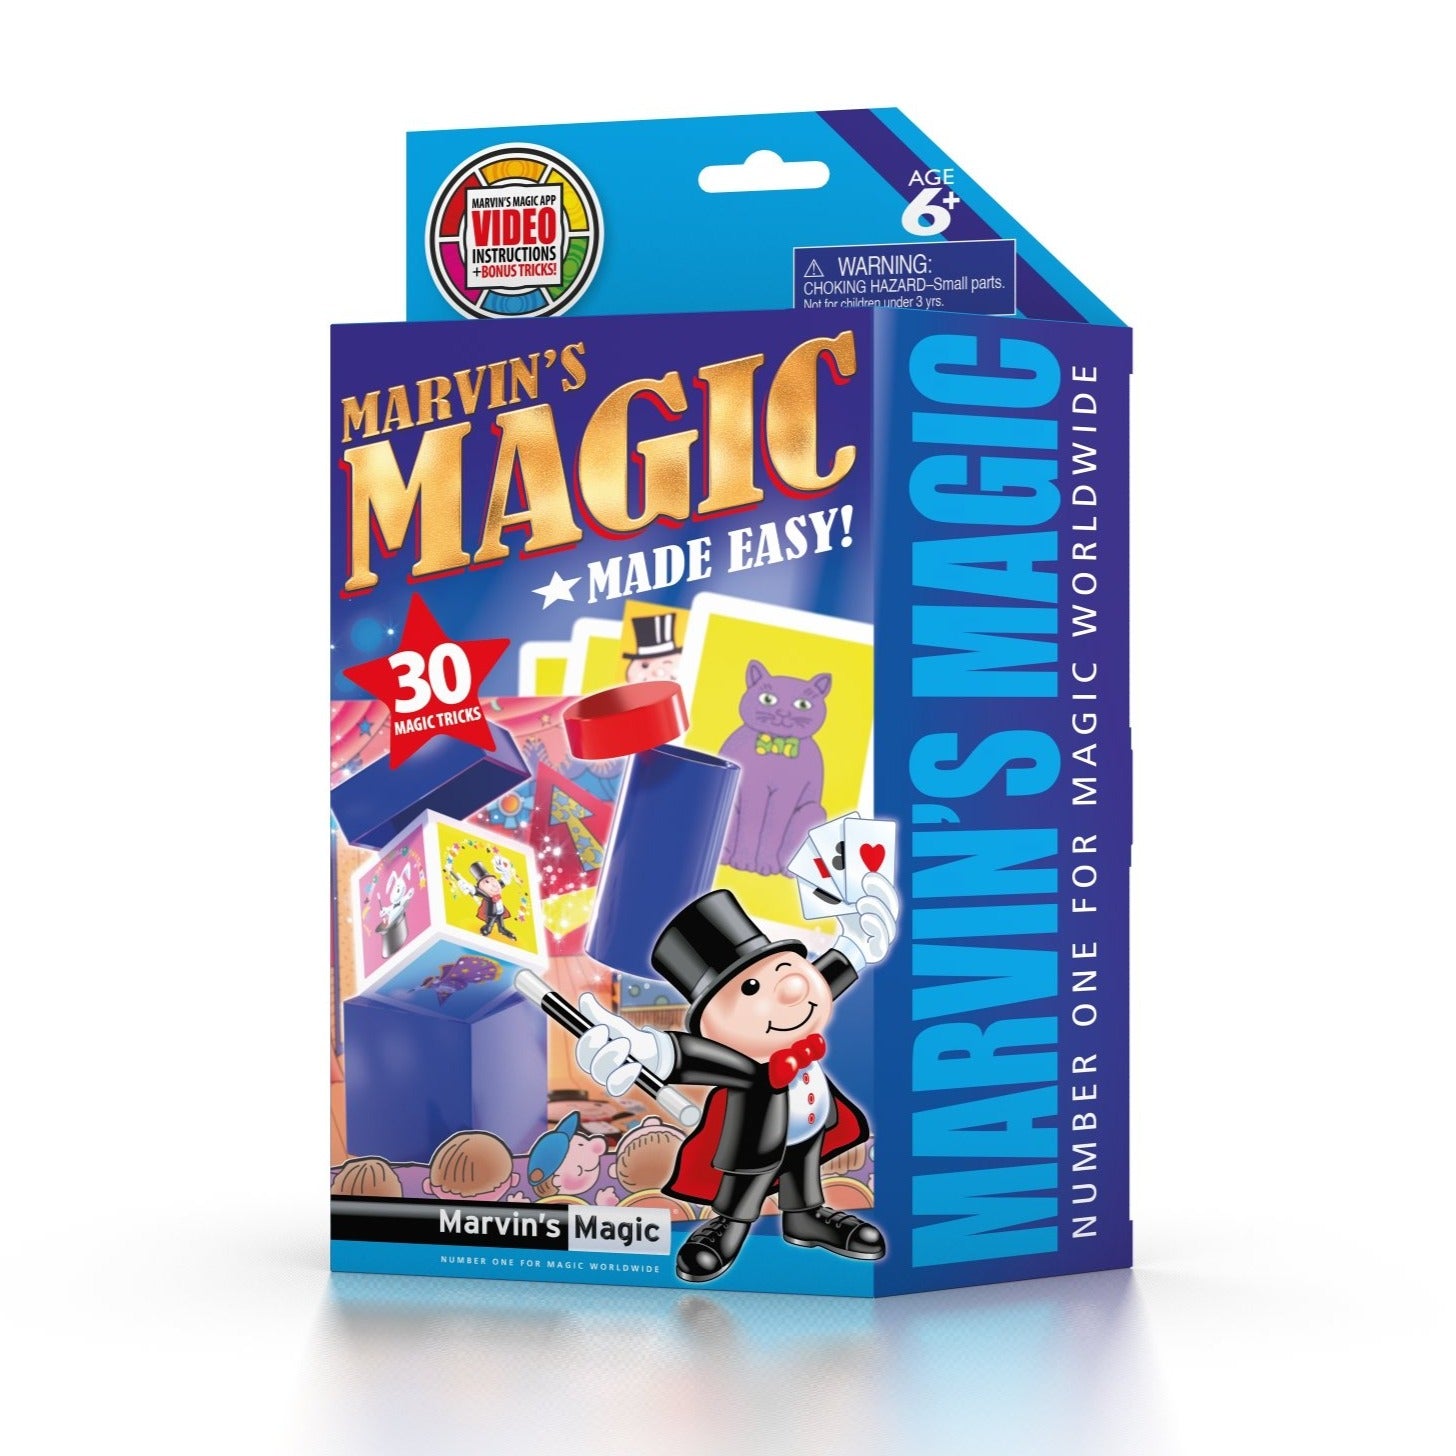 Marvin's Magic Made Easy Sets